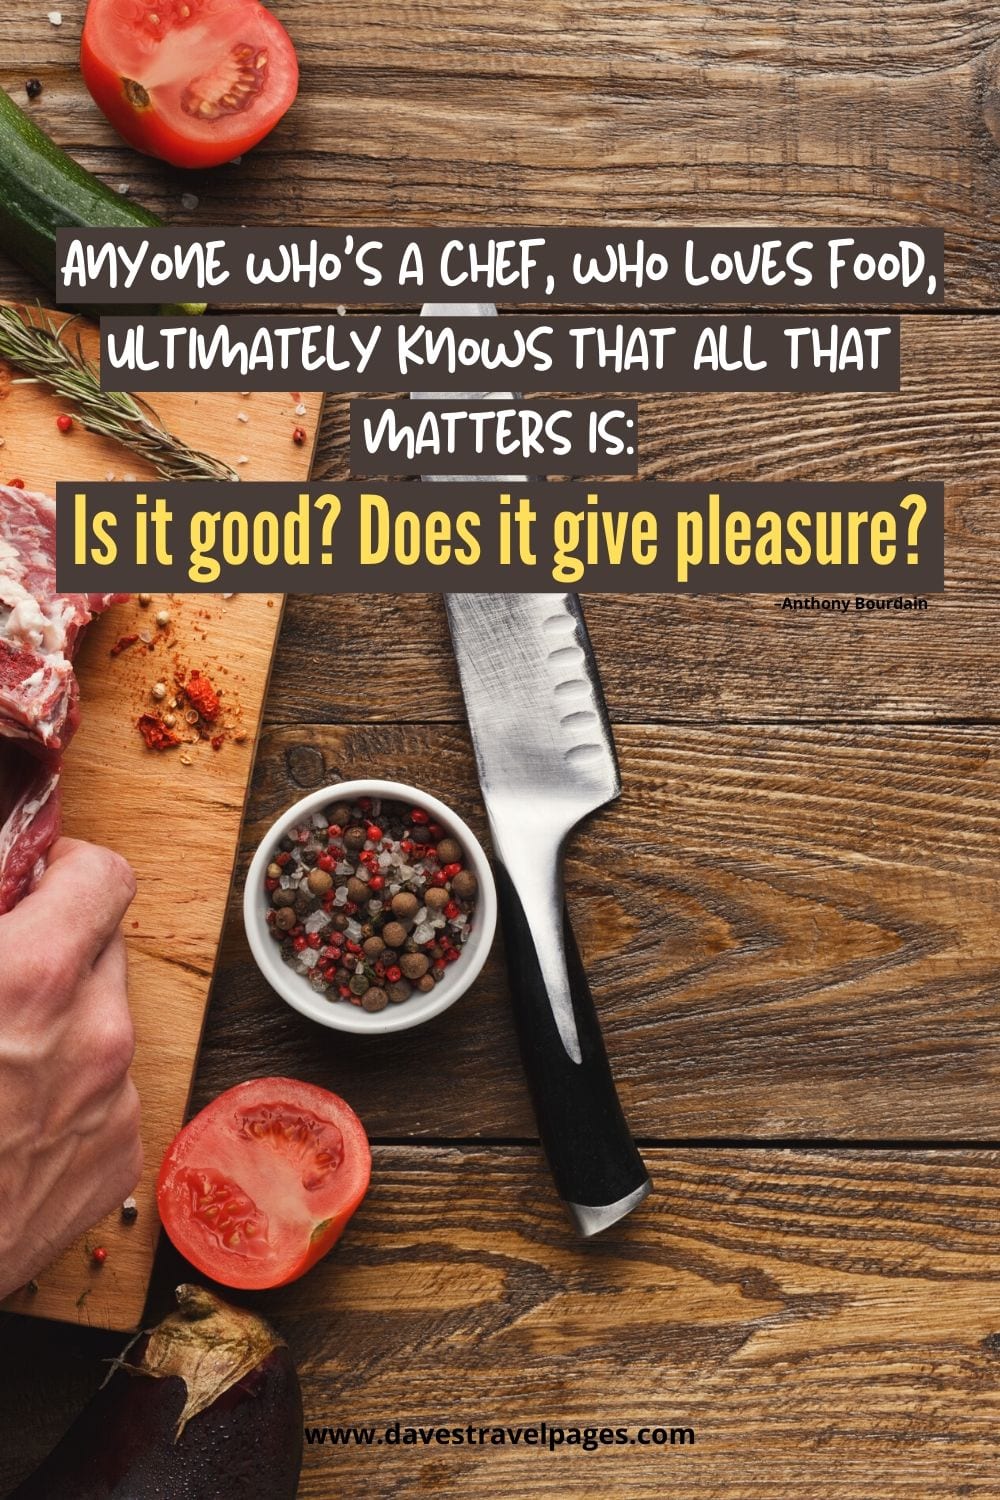 Food lover quote: Anyone who’s a chef, who loves food, ultimately knows that all that matters is: ‘Is it good? Does it give pleasure? –Anthony Bourdain